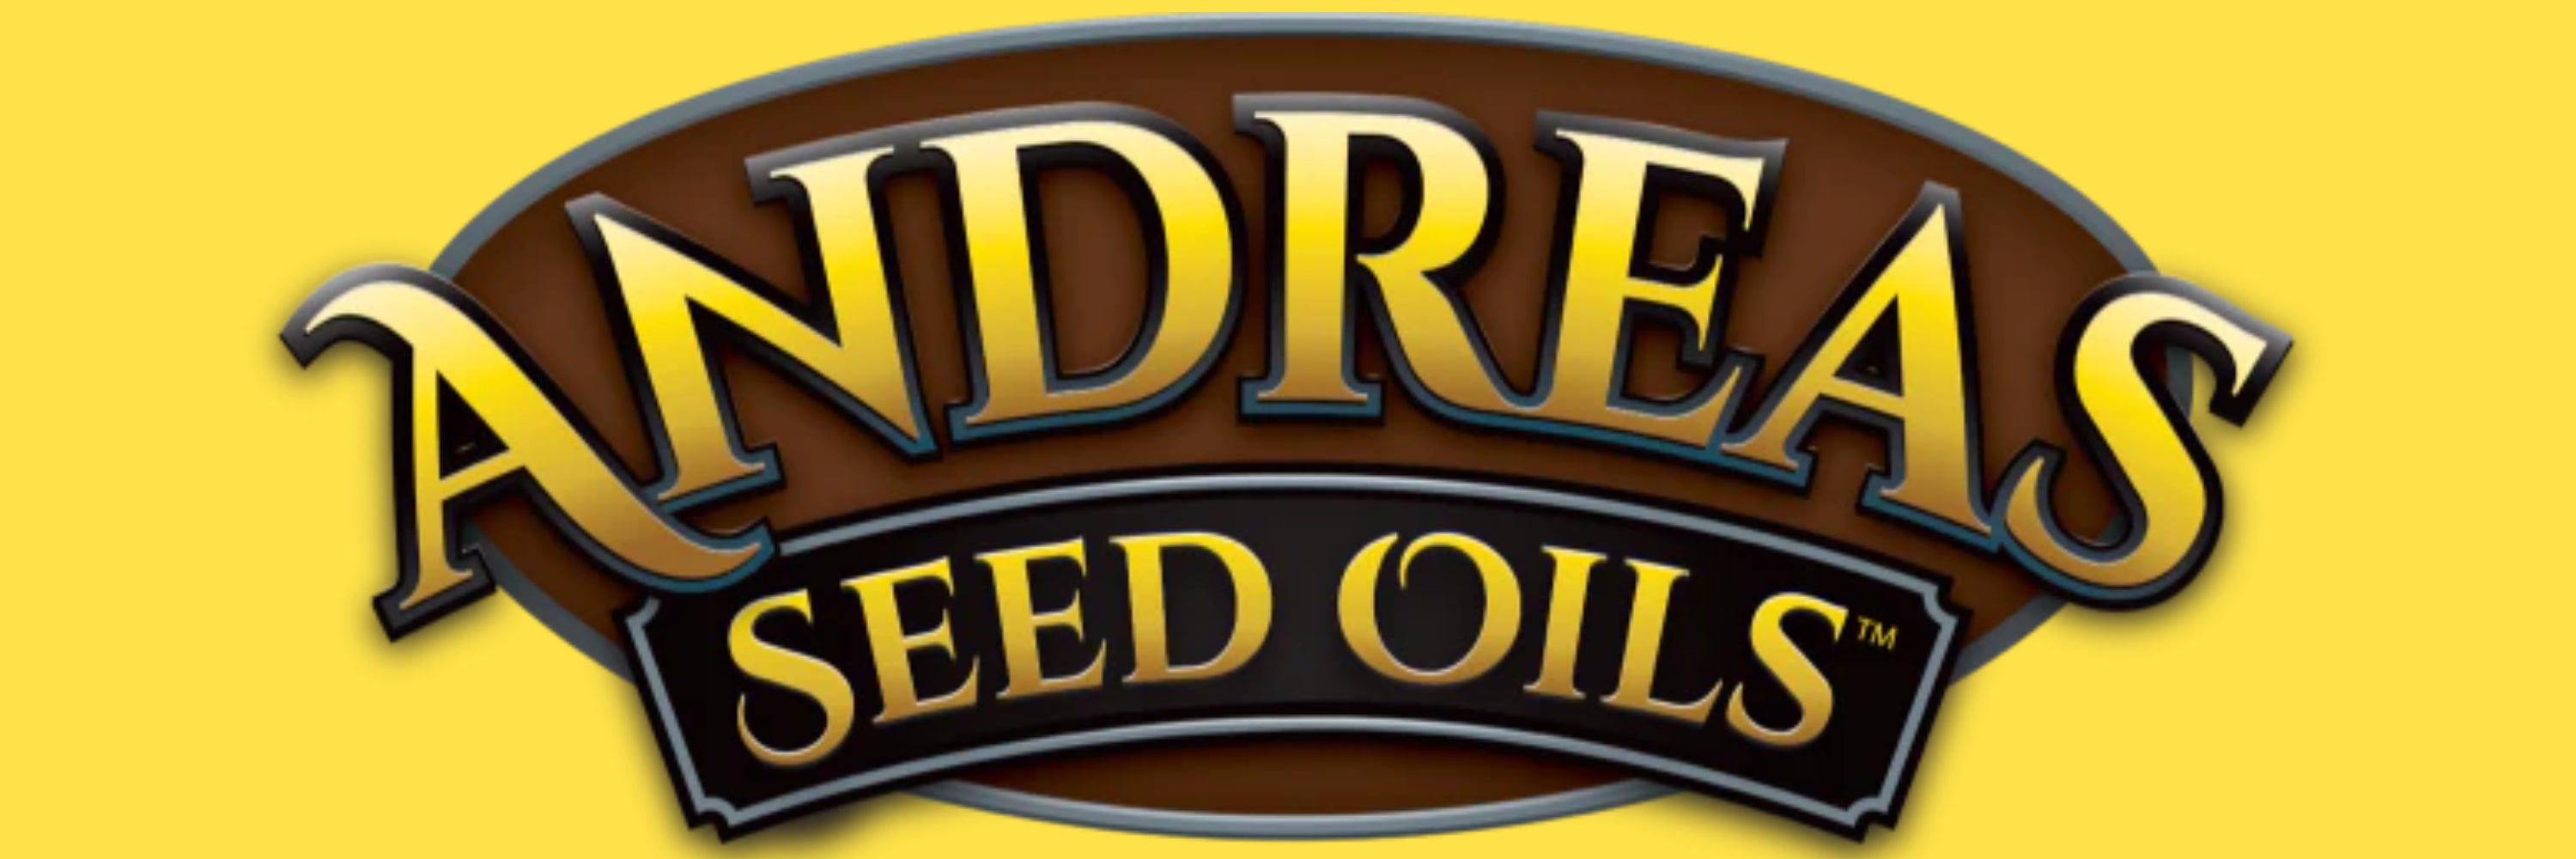 Andreas Seed Oils - Review